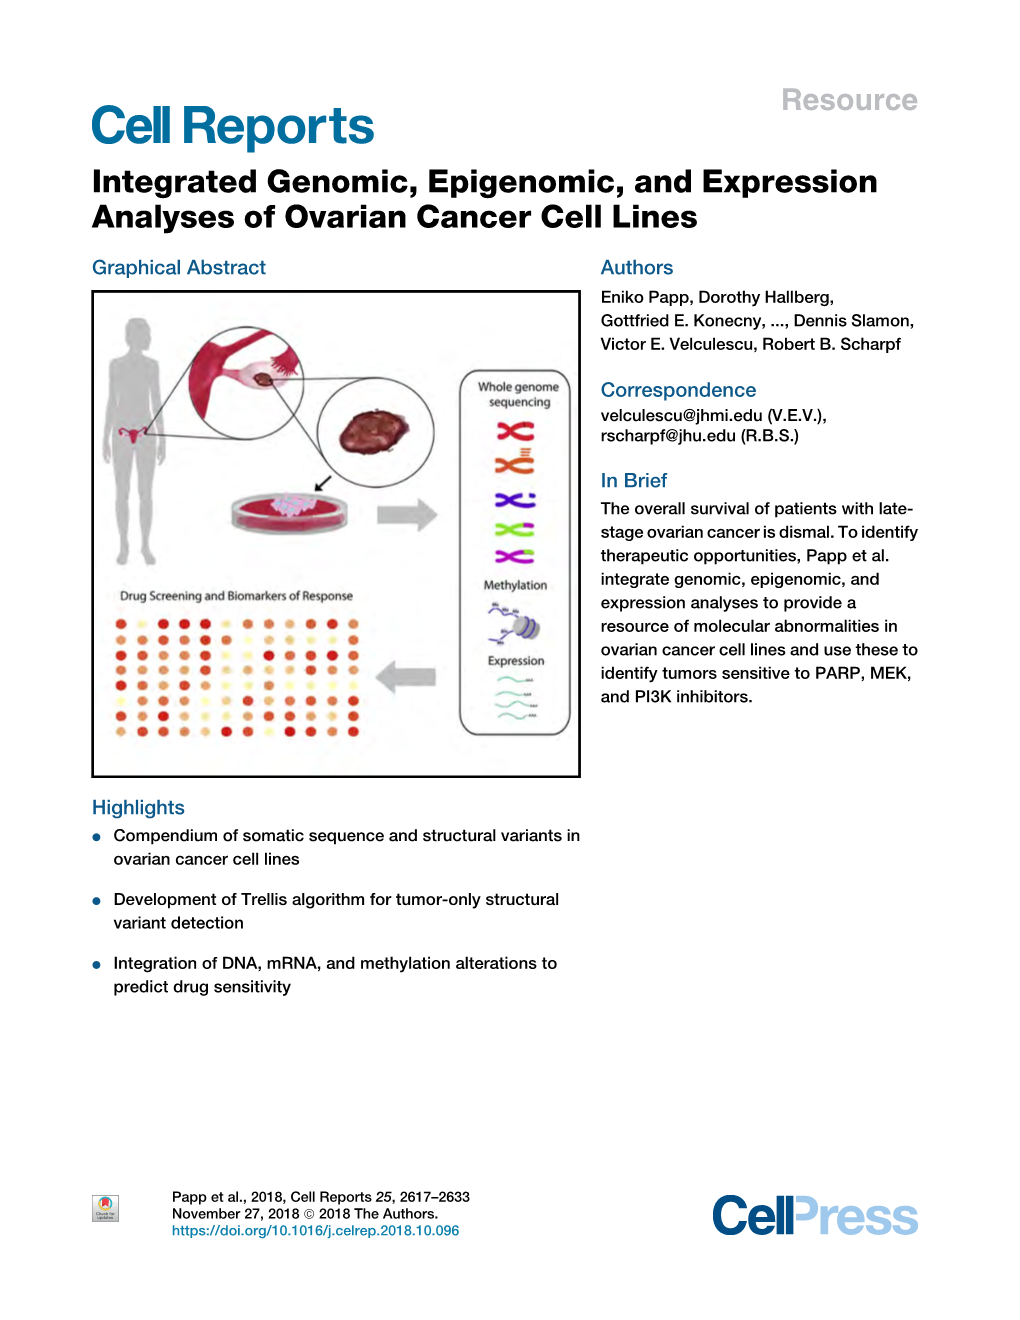 Integrated Genomic, Epigenomic, and Expression Analyses of Ovarian Cancer Cell Lines